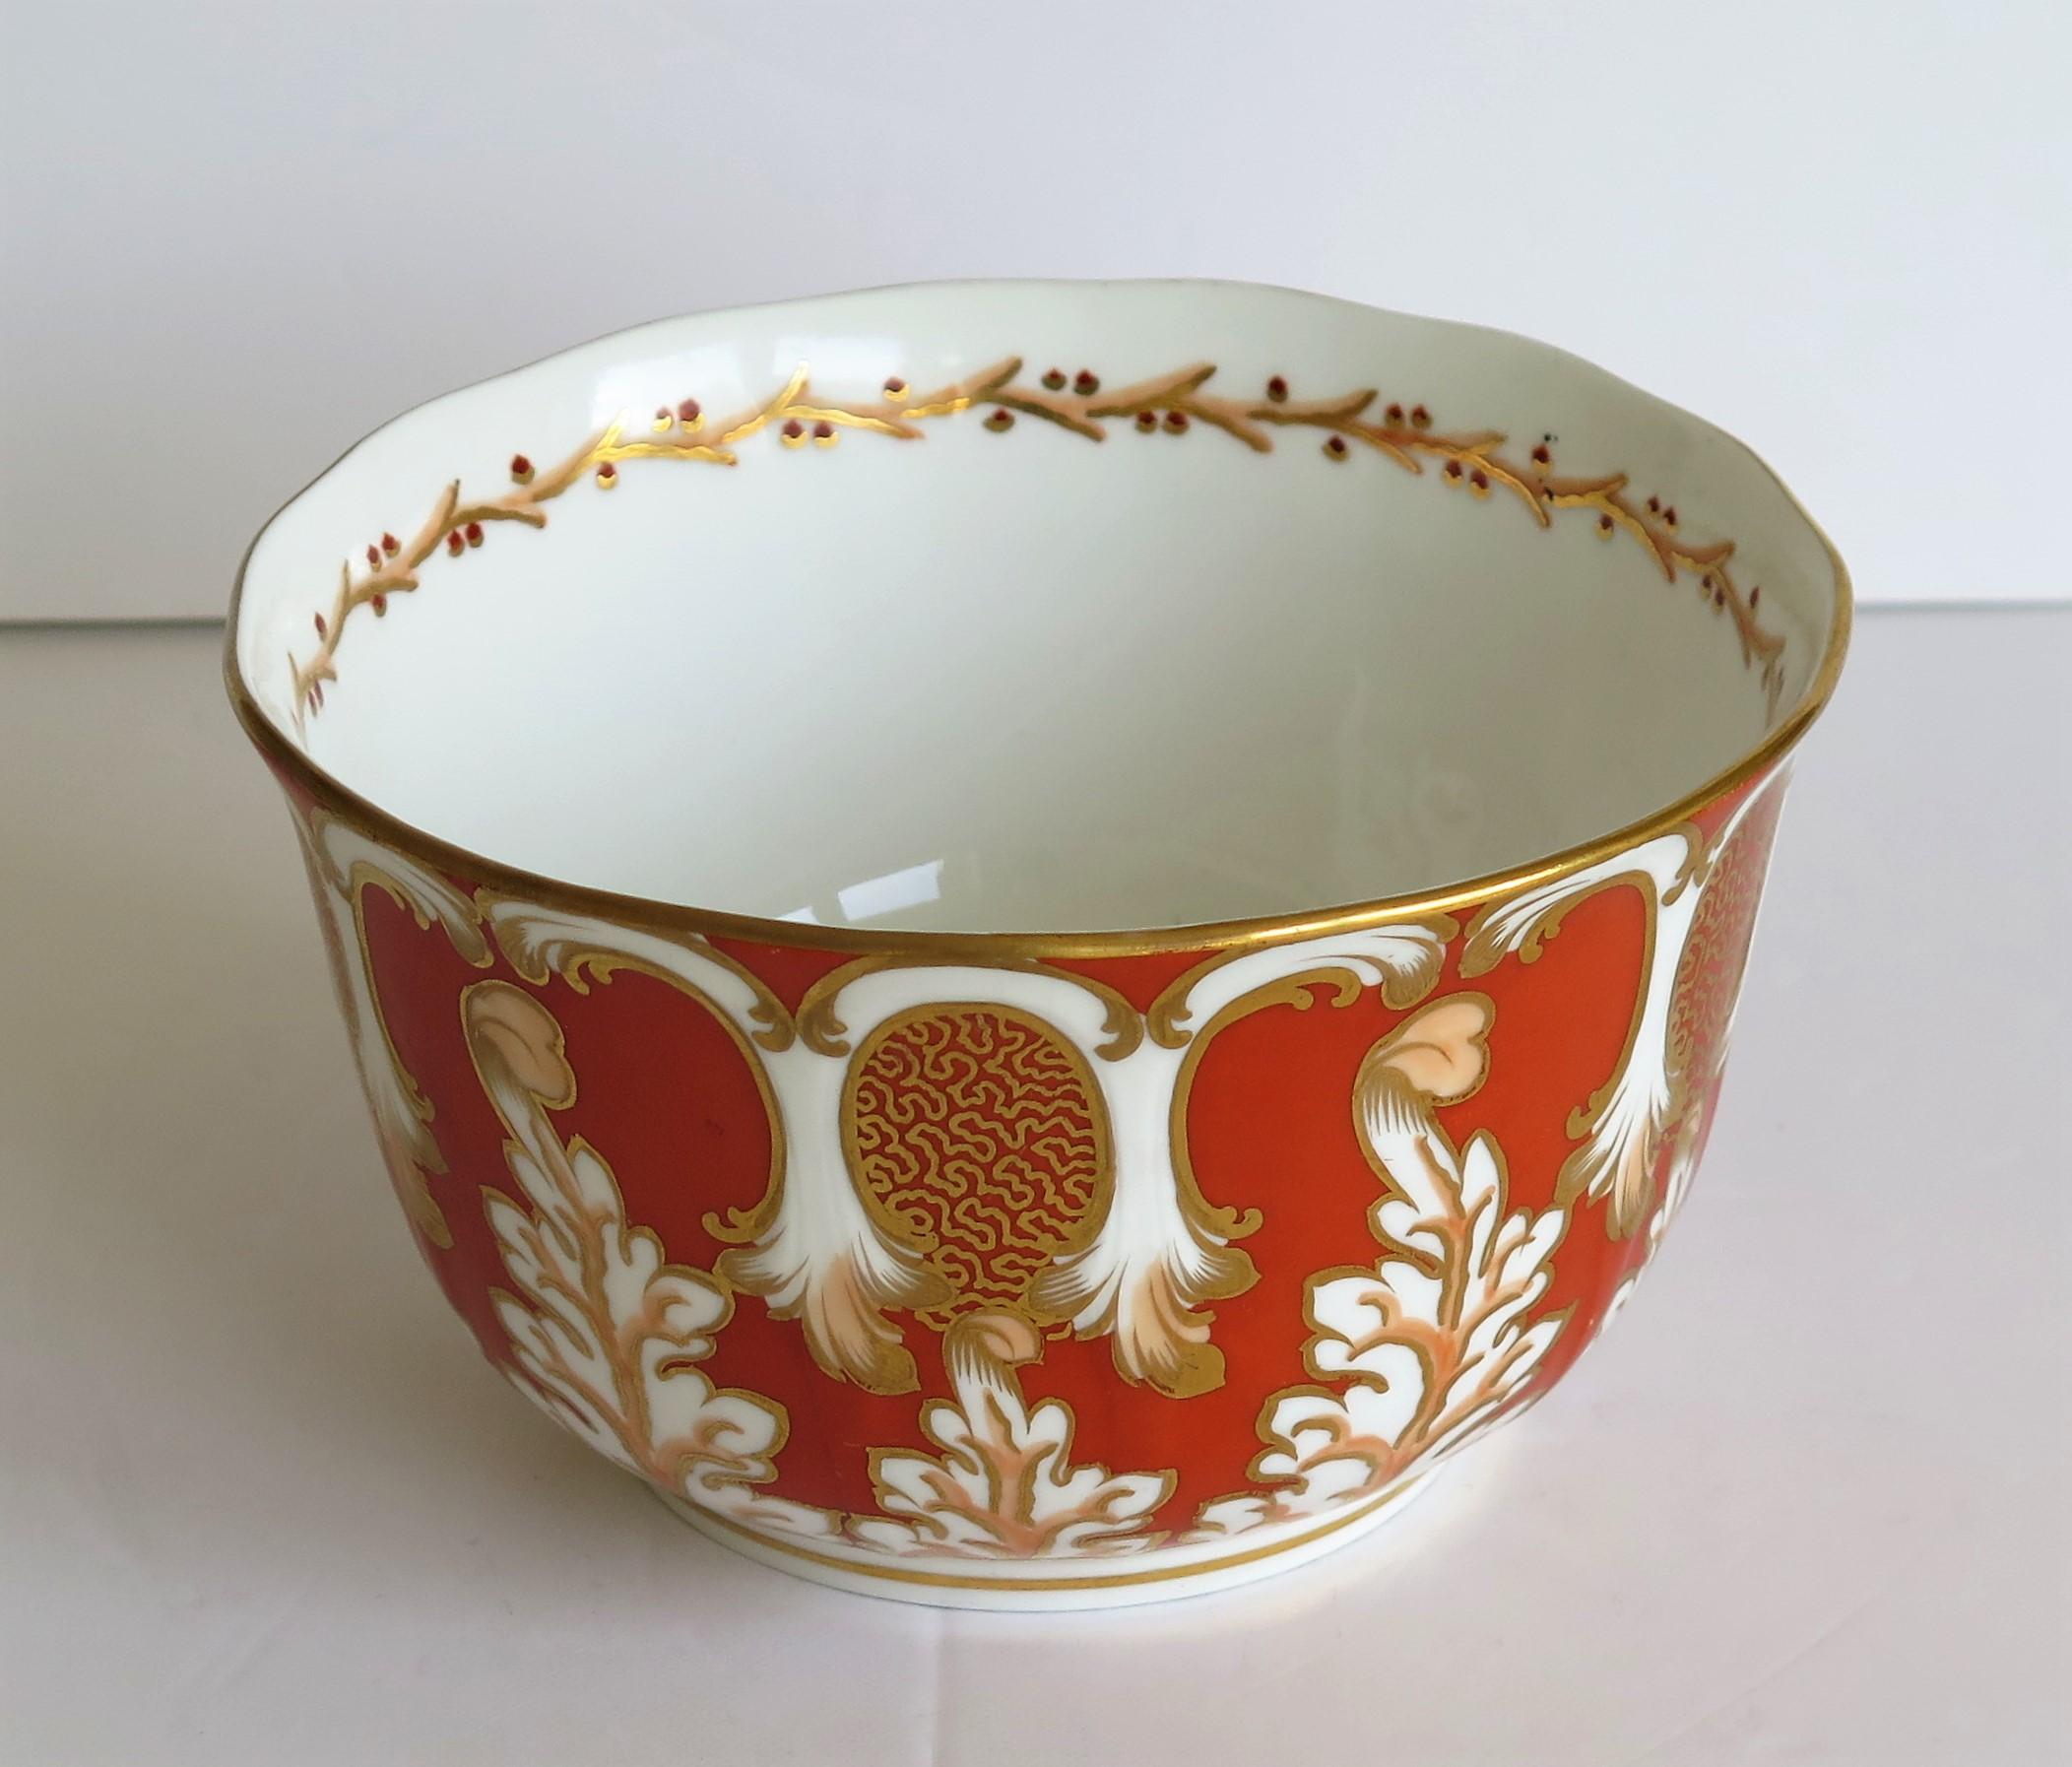 Davenport Porcelain Bowl in Pattern 2144 Fully Marked to Base, English, 1845 1